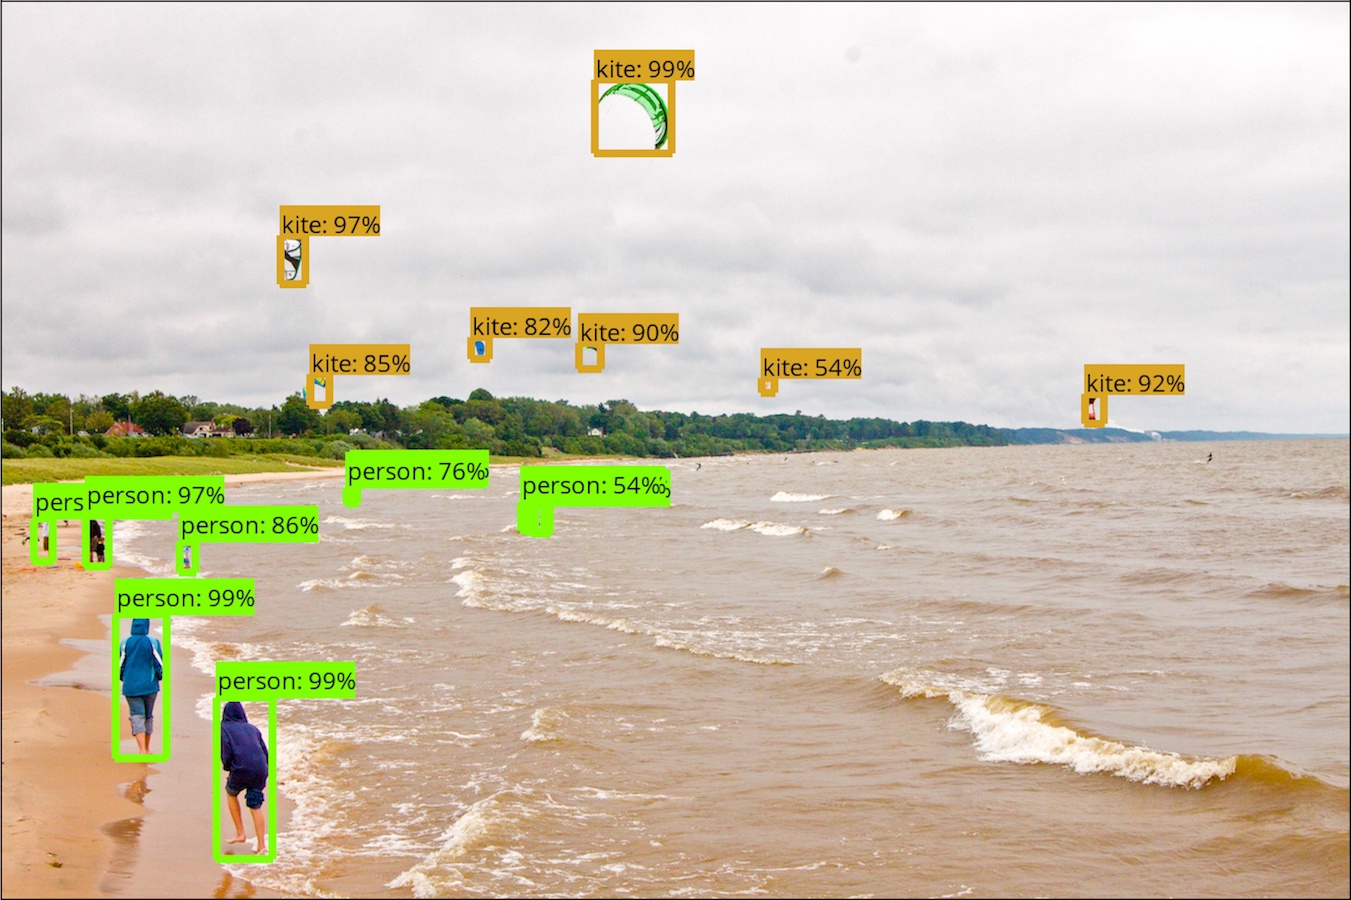 How to Build a Machine Learning App: Google Tensorflow Object Detection API